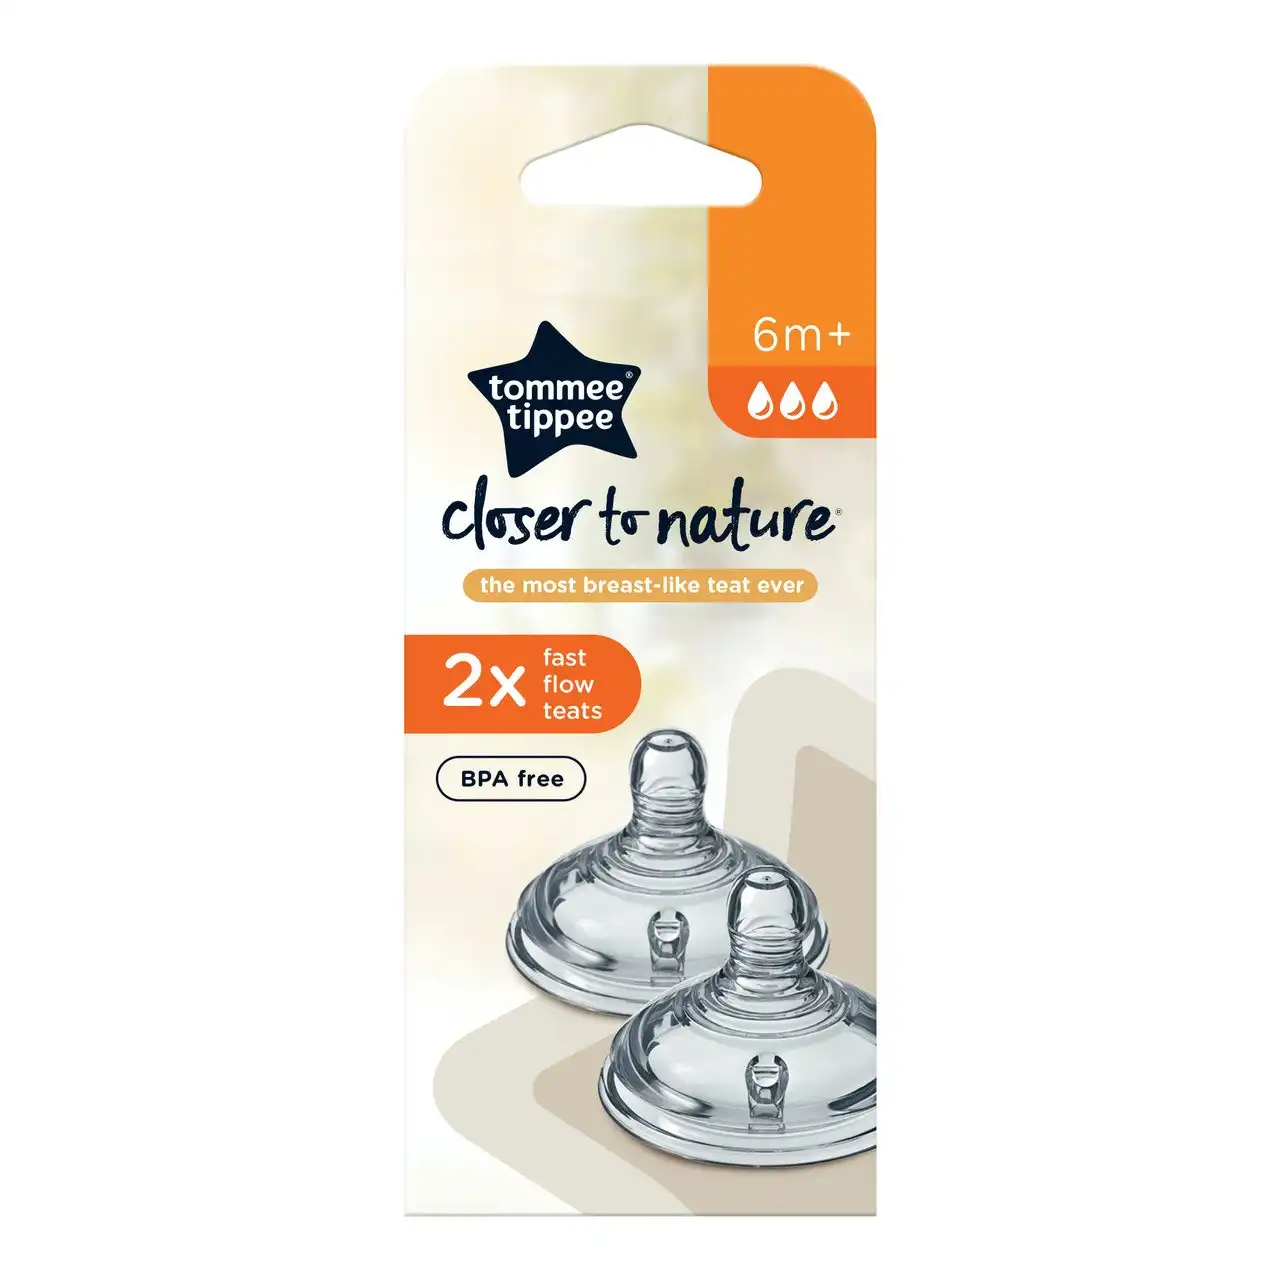 Tommee Tippee Closer to Nature Baby Bottle Teats, Breast-like, Anti-colic Valve, Soft Silicone, Fast Flow, 6m+, 2 Pack